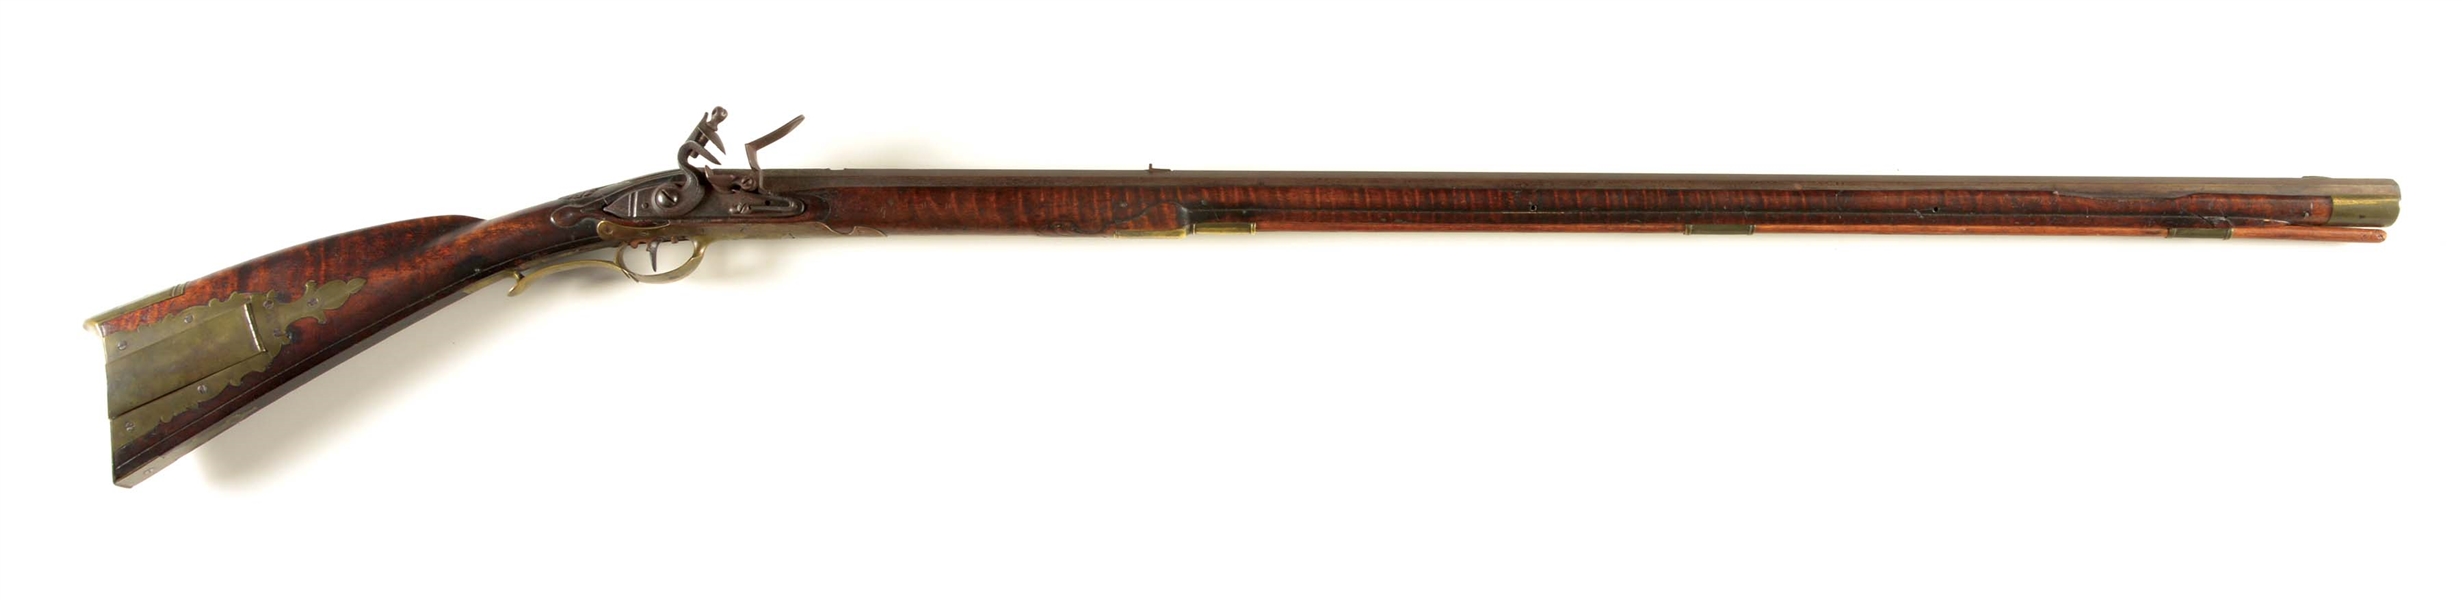 (A) EARLY FULLSTOCK RELIEF-CARVED KENTUCKY LONGRIFLE ATTRIBUTED TO WOLFGANG HAGA.